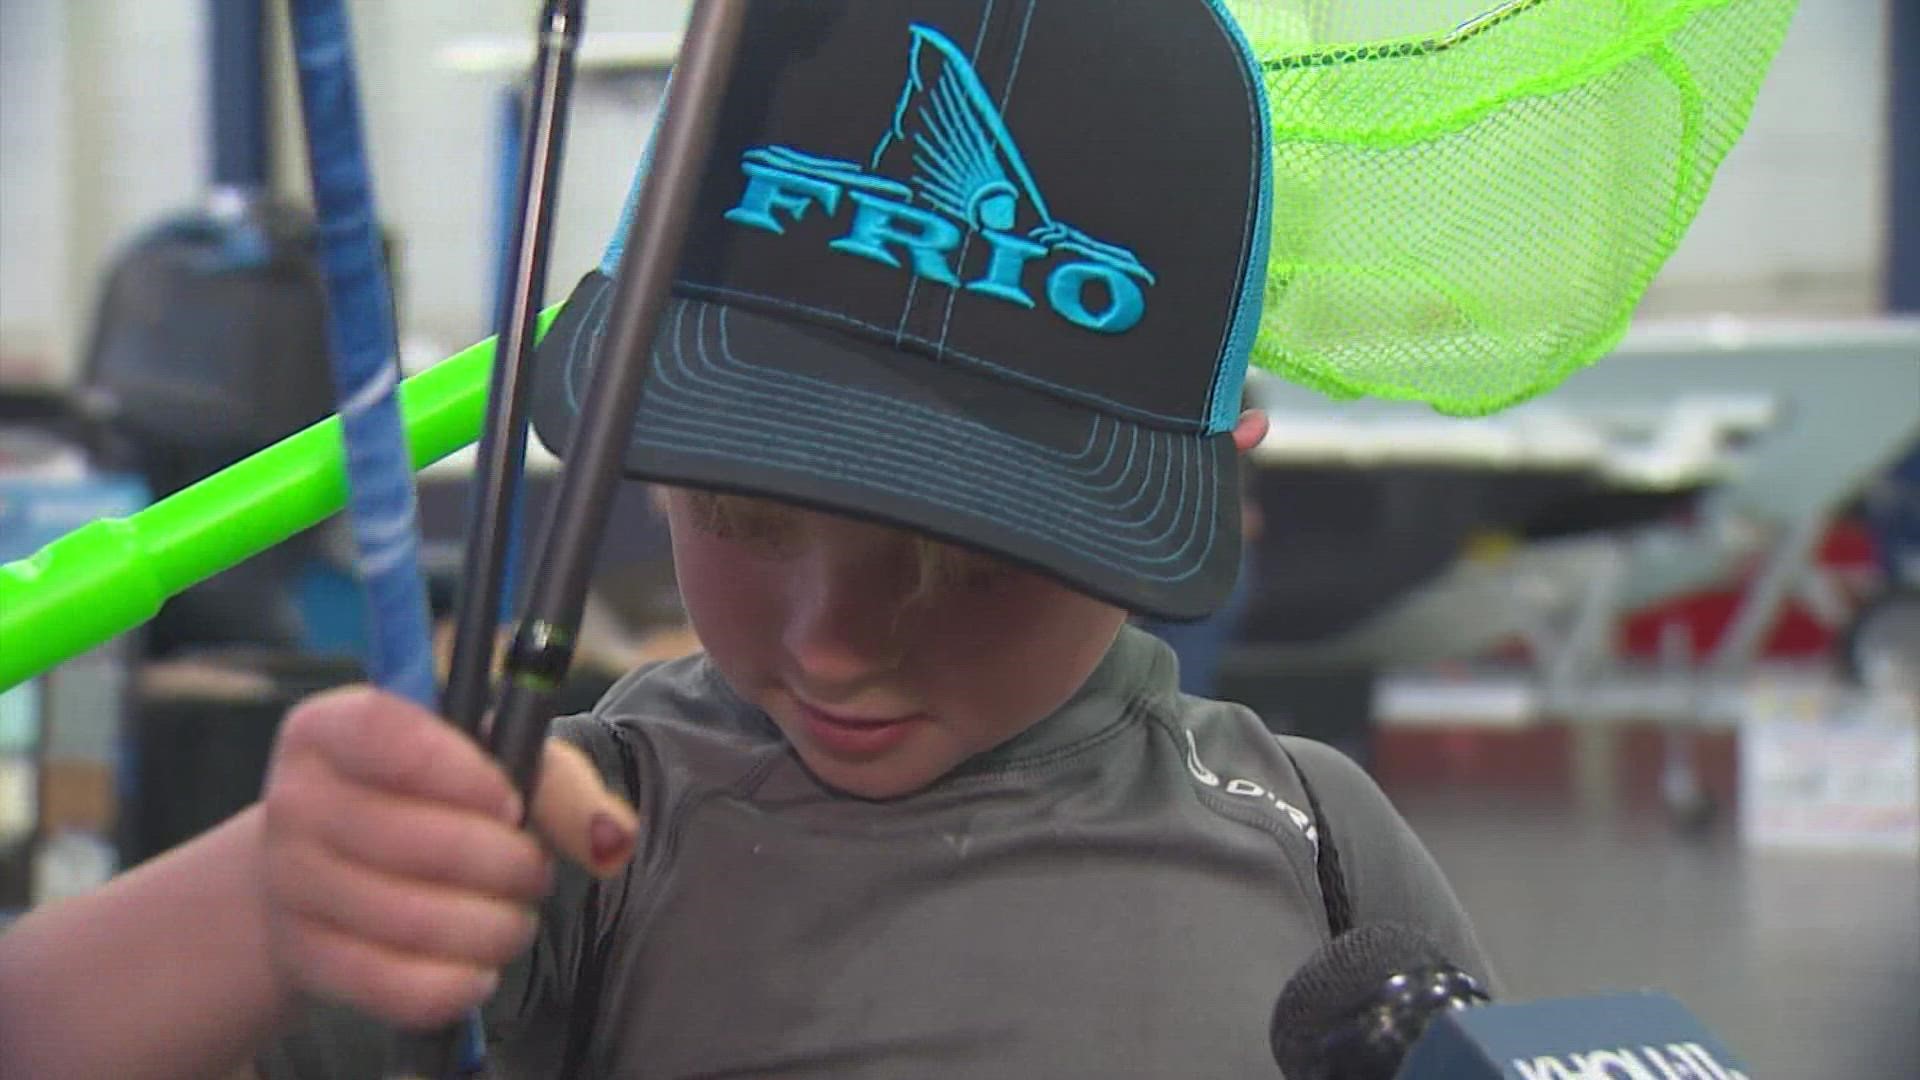 The 47th annual Houston Fishing Show is underway at the George R. Brown Convention Center.